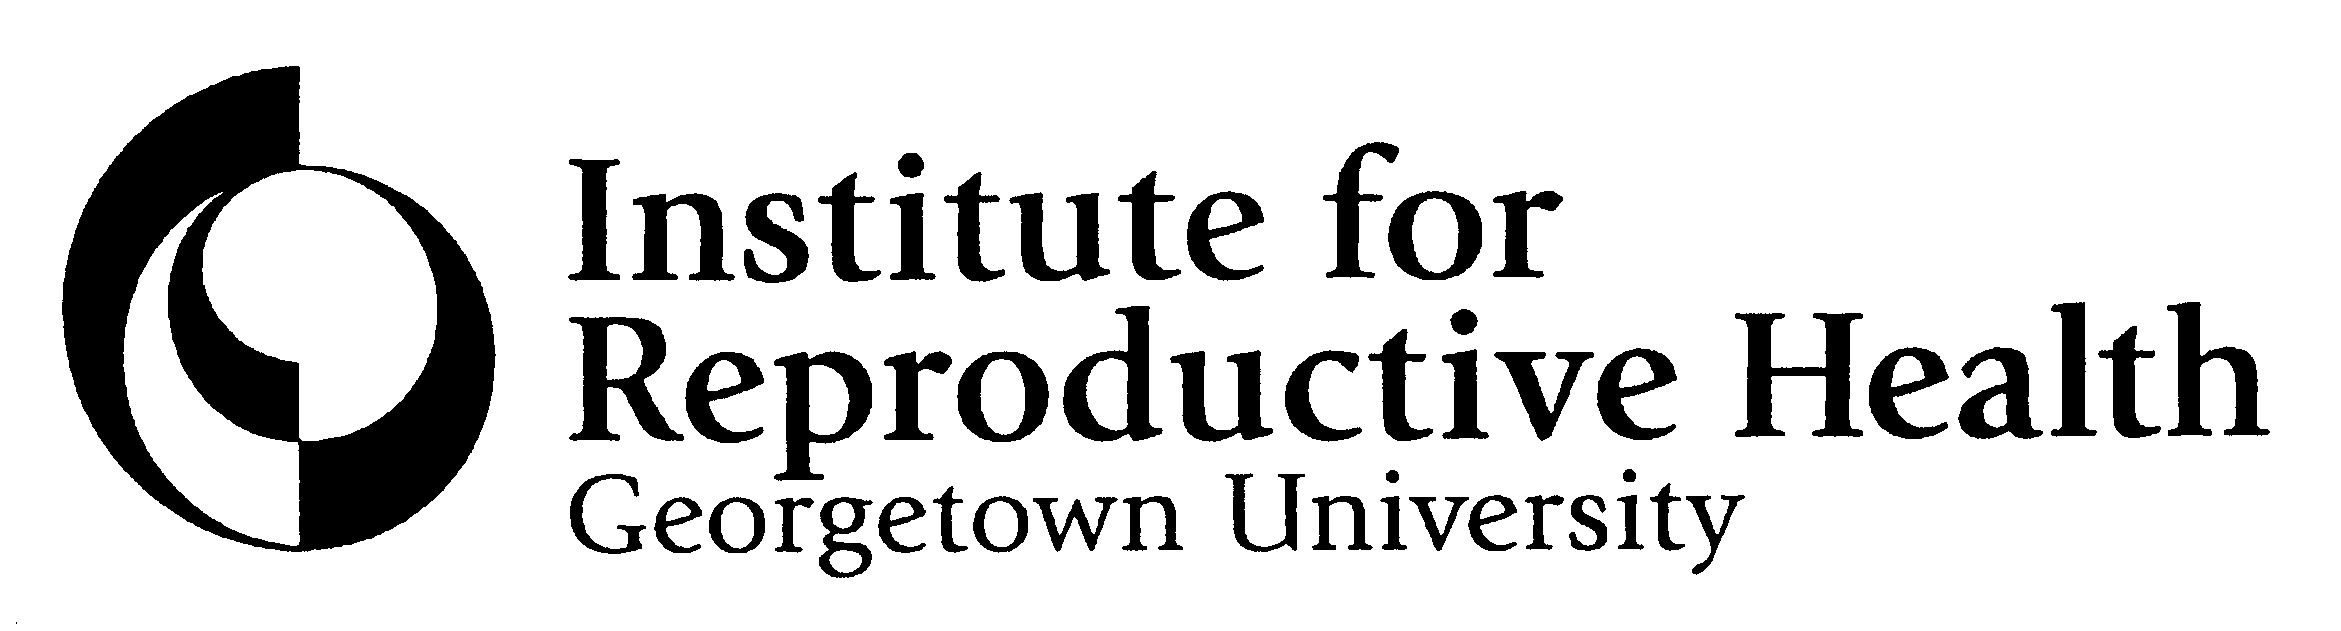  INSTITUTE FOR REPRODUCTIVE HEALTH GEORGETOWN UNIVERSITY